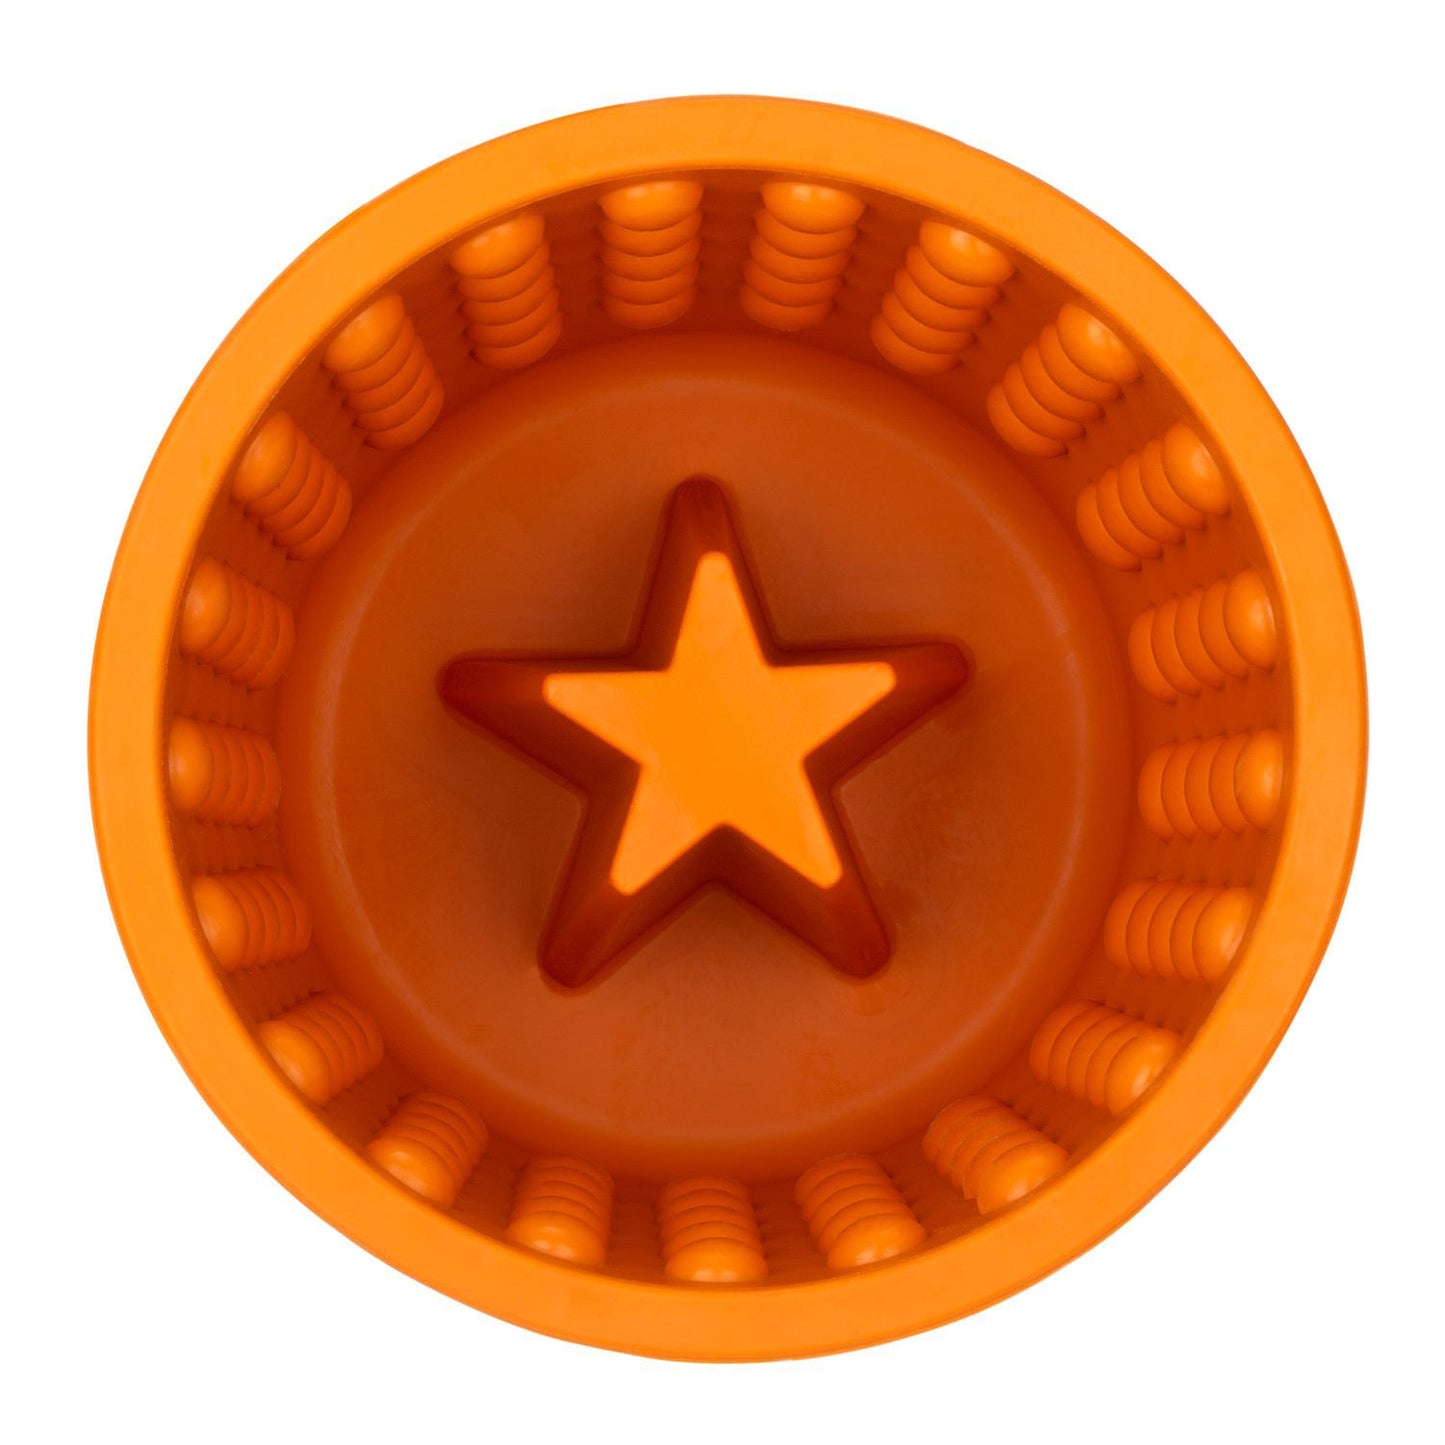 Orange plastic LickiMat: Yoggie Pot Slow Feeder Bowl ashtray with star design in the center by Your Whole Dog.